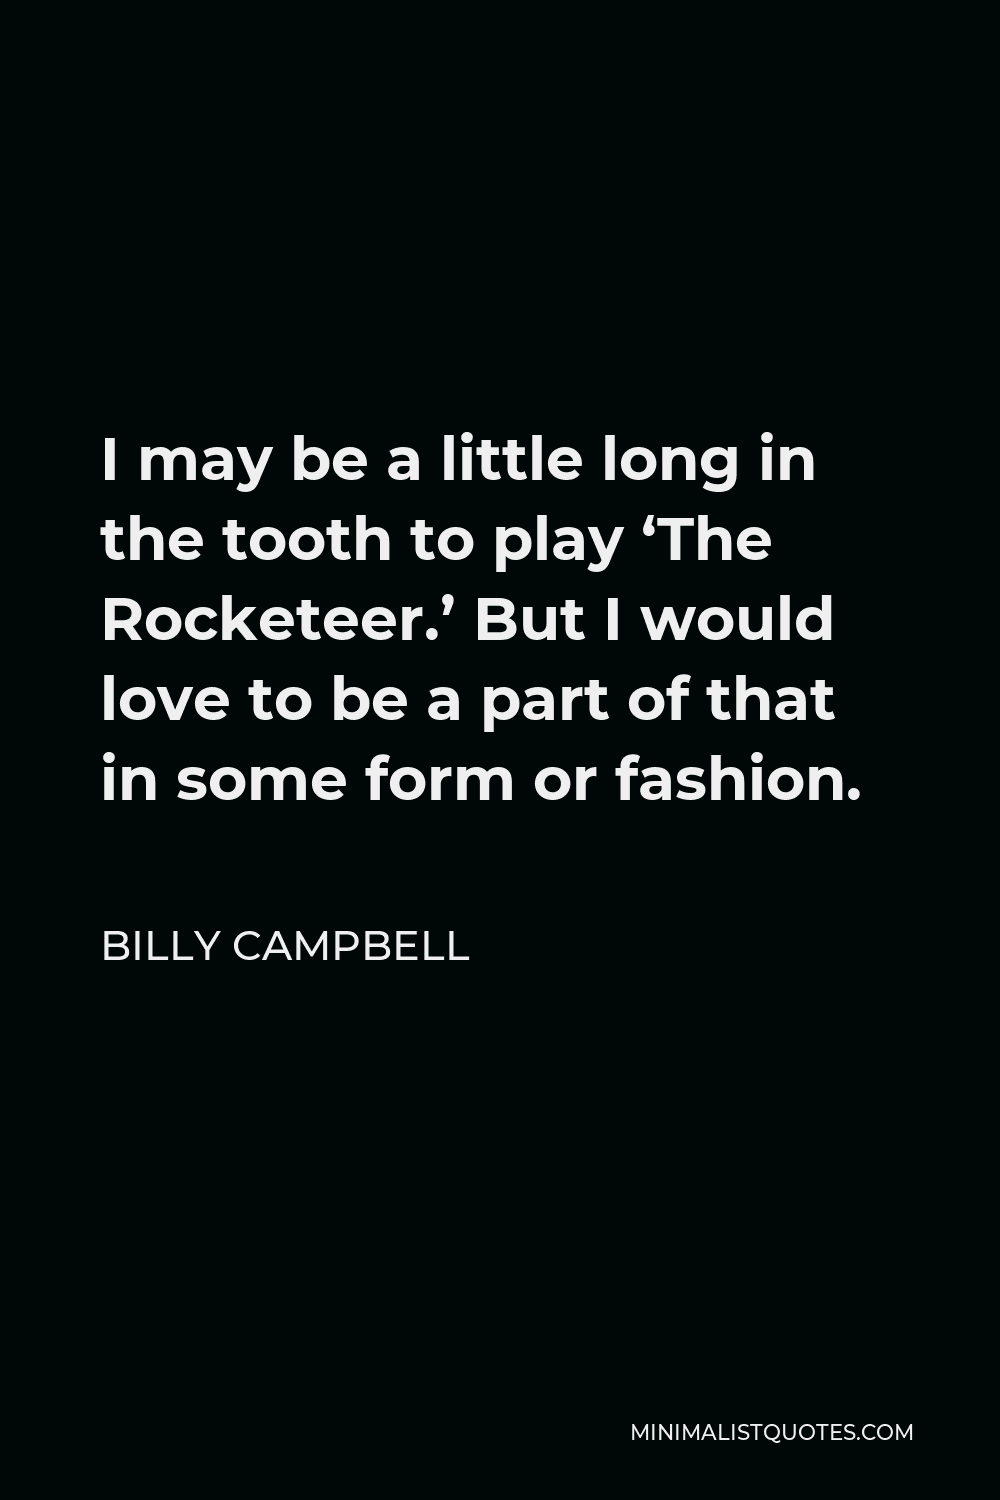 Billy Campbell Quote - I may be a little long in the tooth to play ‘The Rocketeer.’ But I would love to be a part of that in some form or fashion.